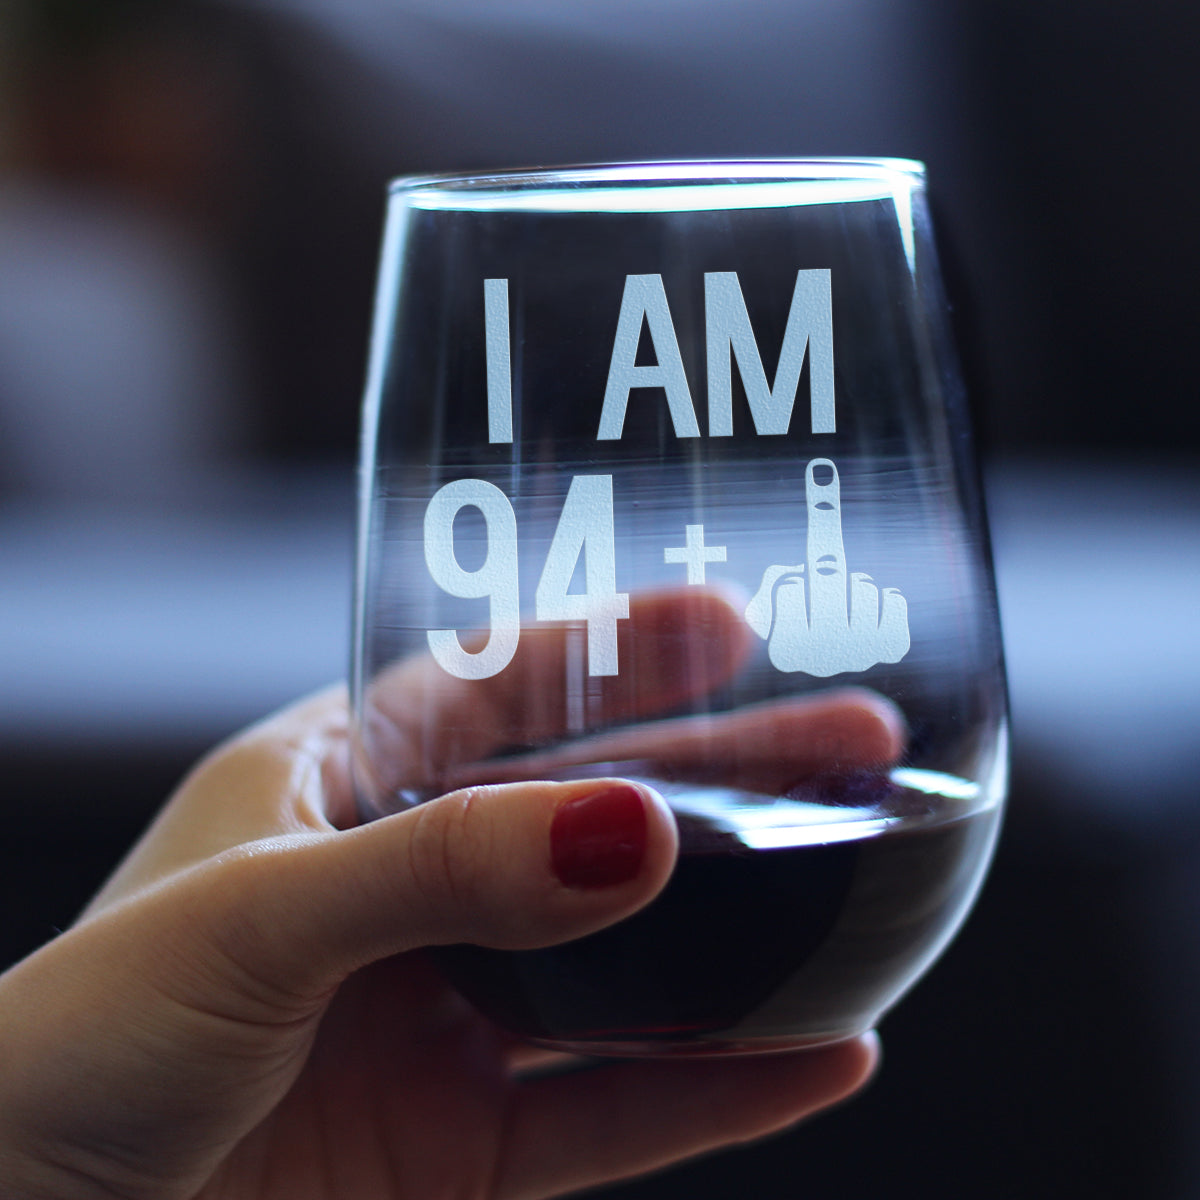 94 + 1 Middle Finger - 17 Ounce Stemless Wine Glass